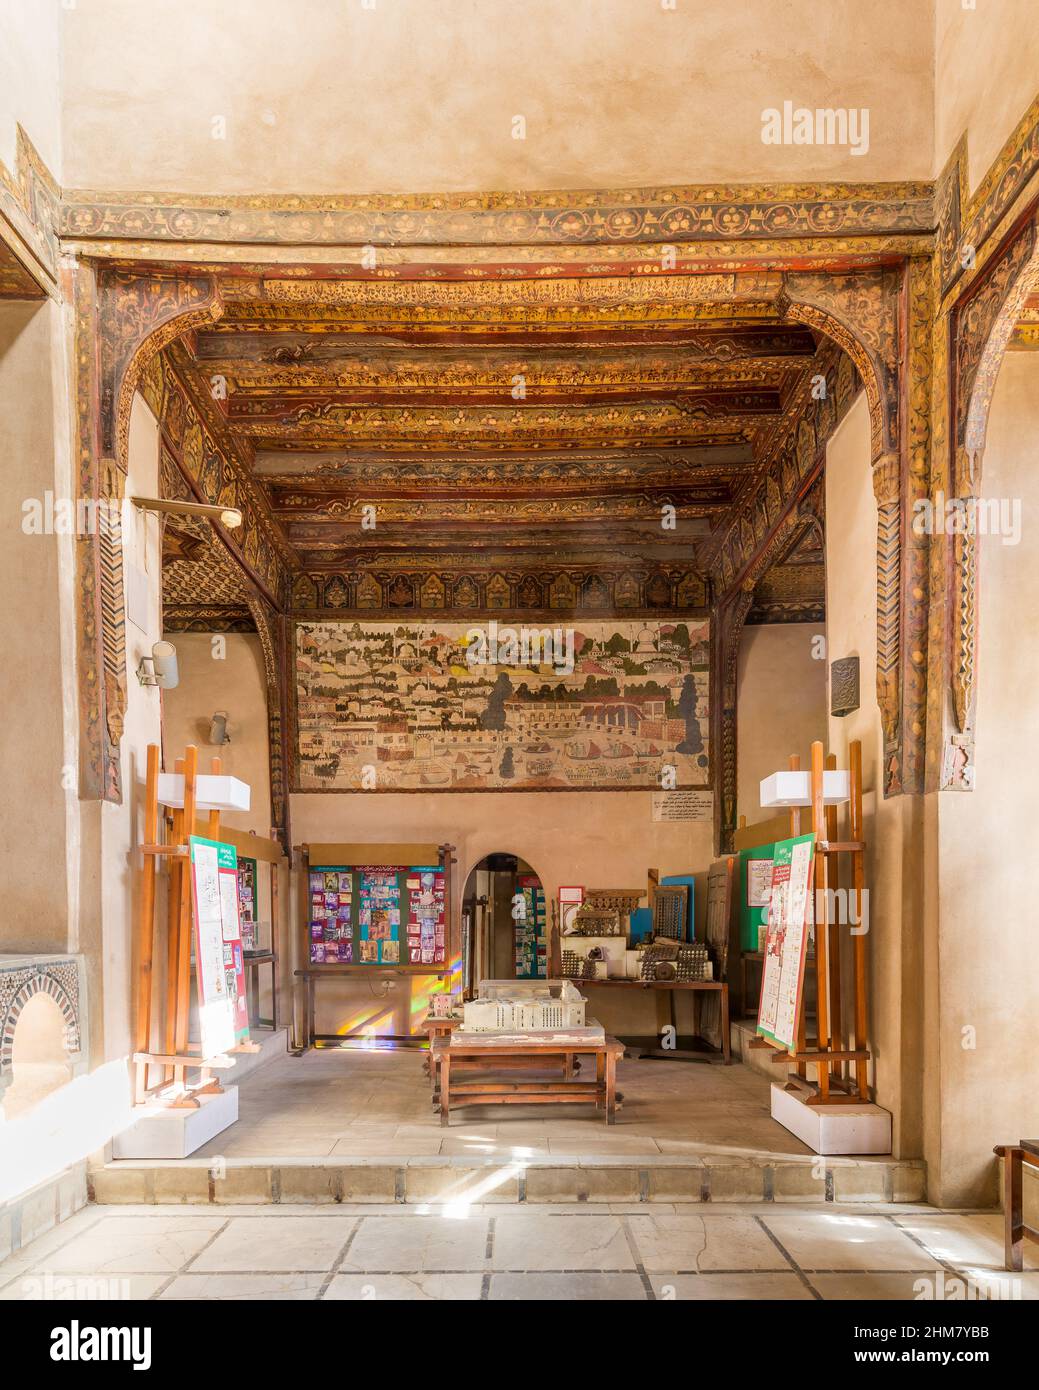 Hall at Ottoman era House of Egyptian Architecture building, aka Ali Labib House, Darb El Labbana district, off the citadel square, with decorated wooden ceiling and Turkish Golden Horn mural Stock Photo